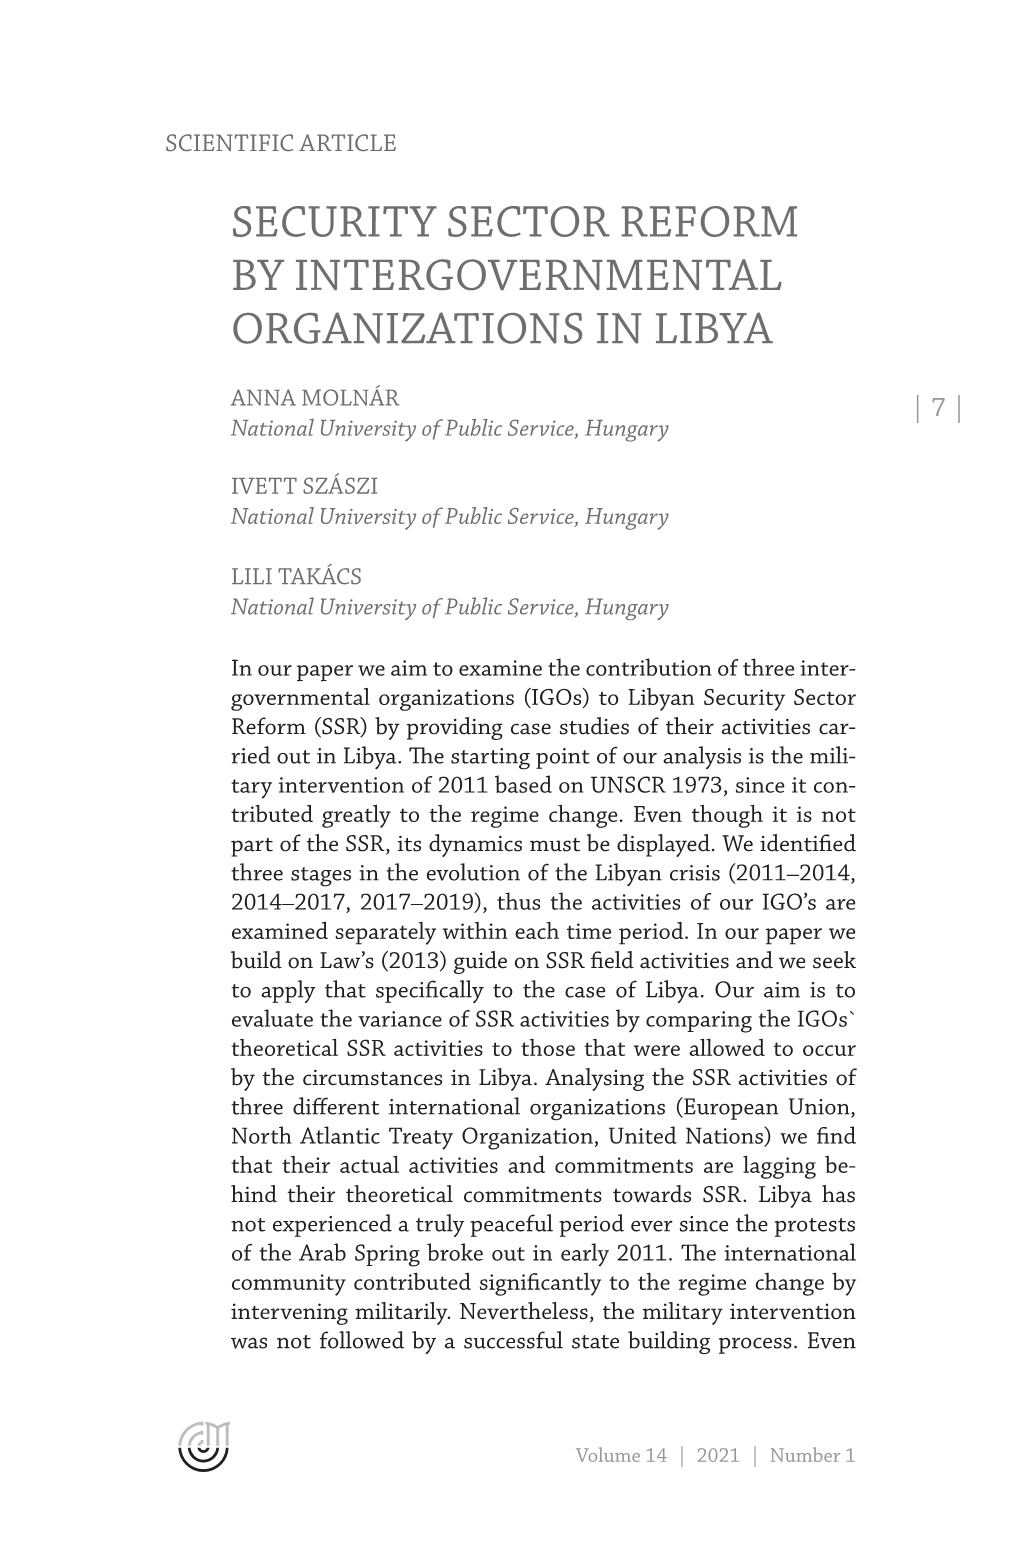 Security Sector Reform by Intergovernmental Organizations in Libya